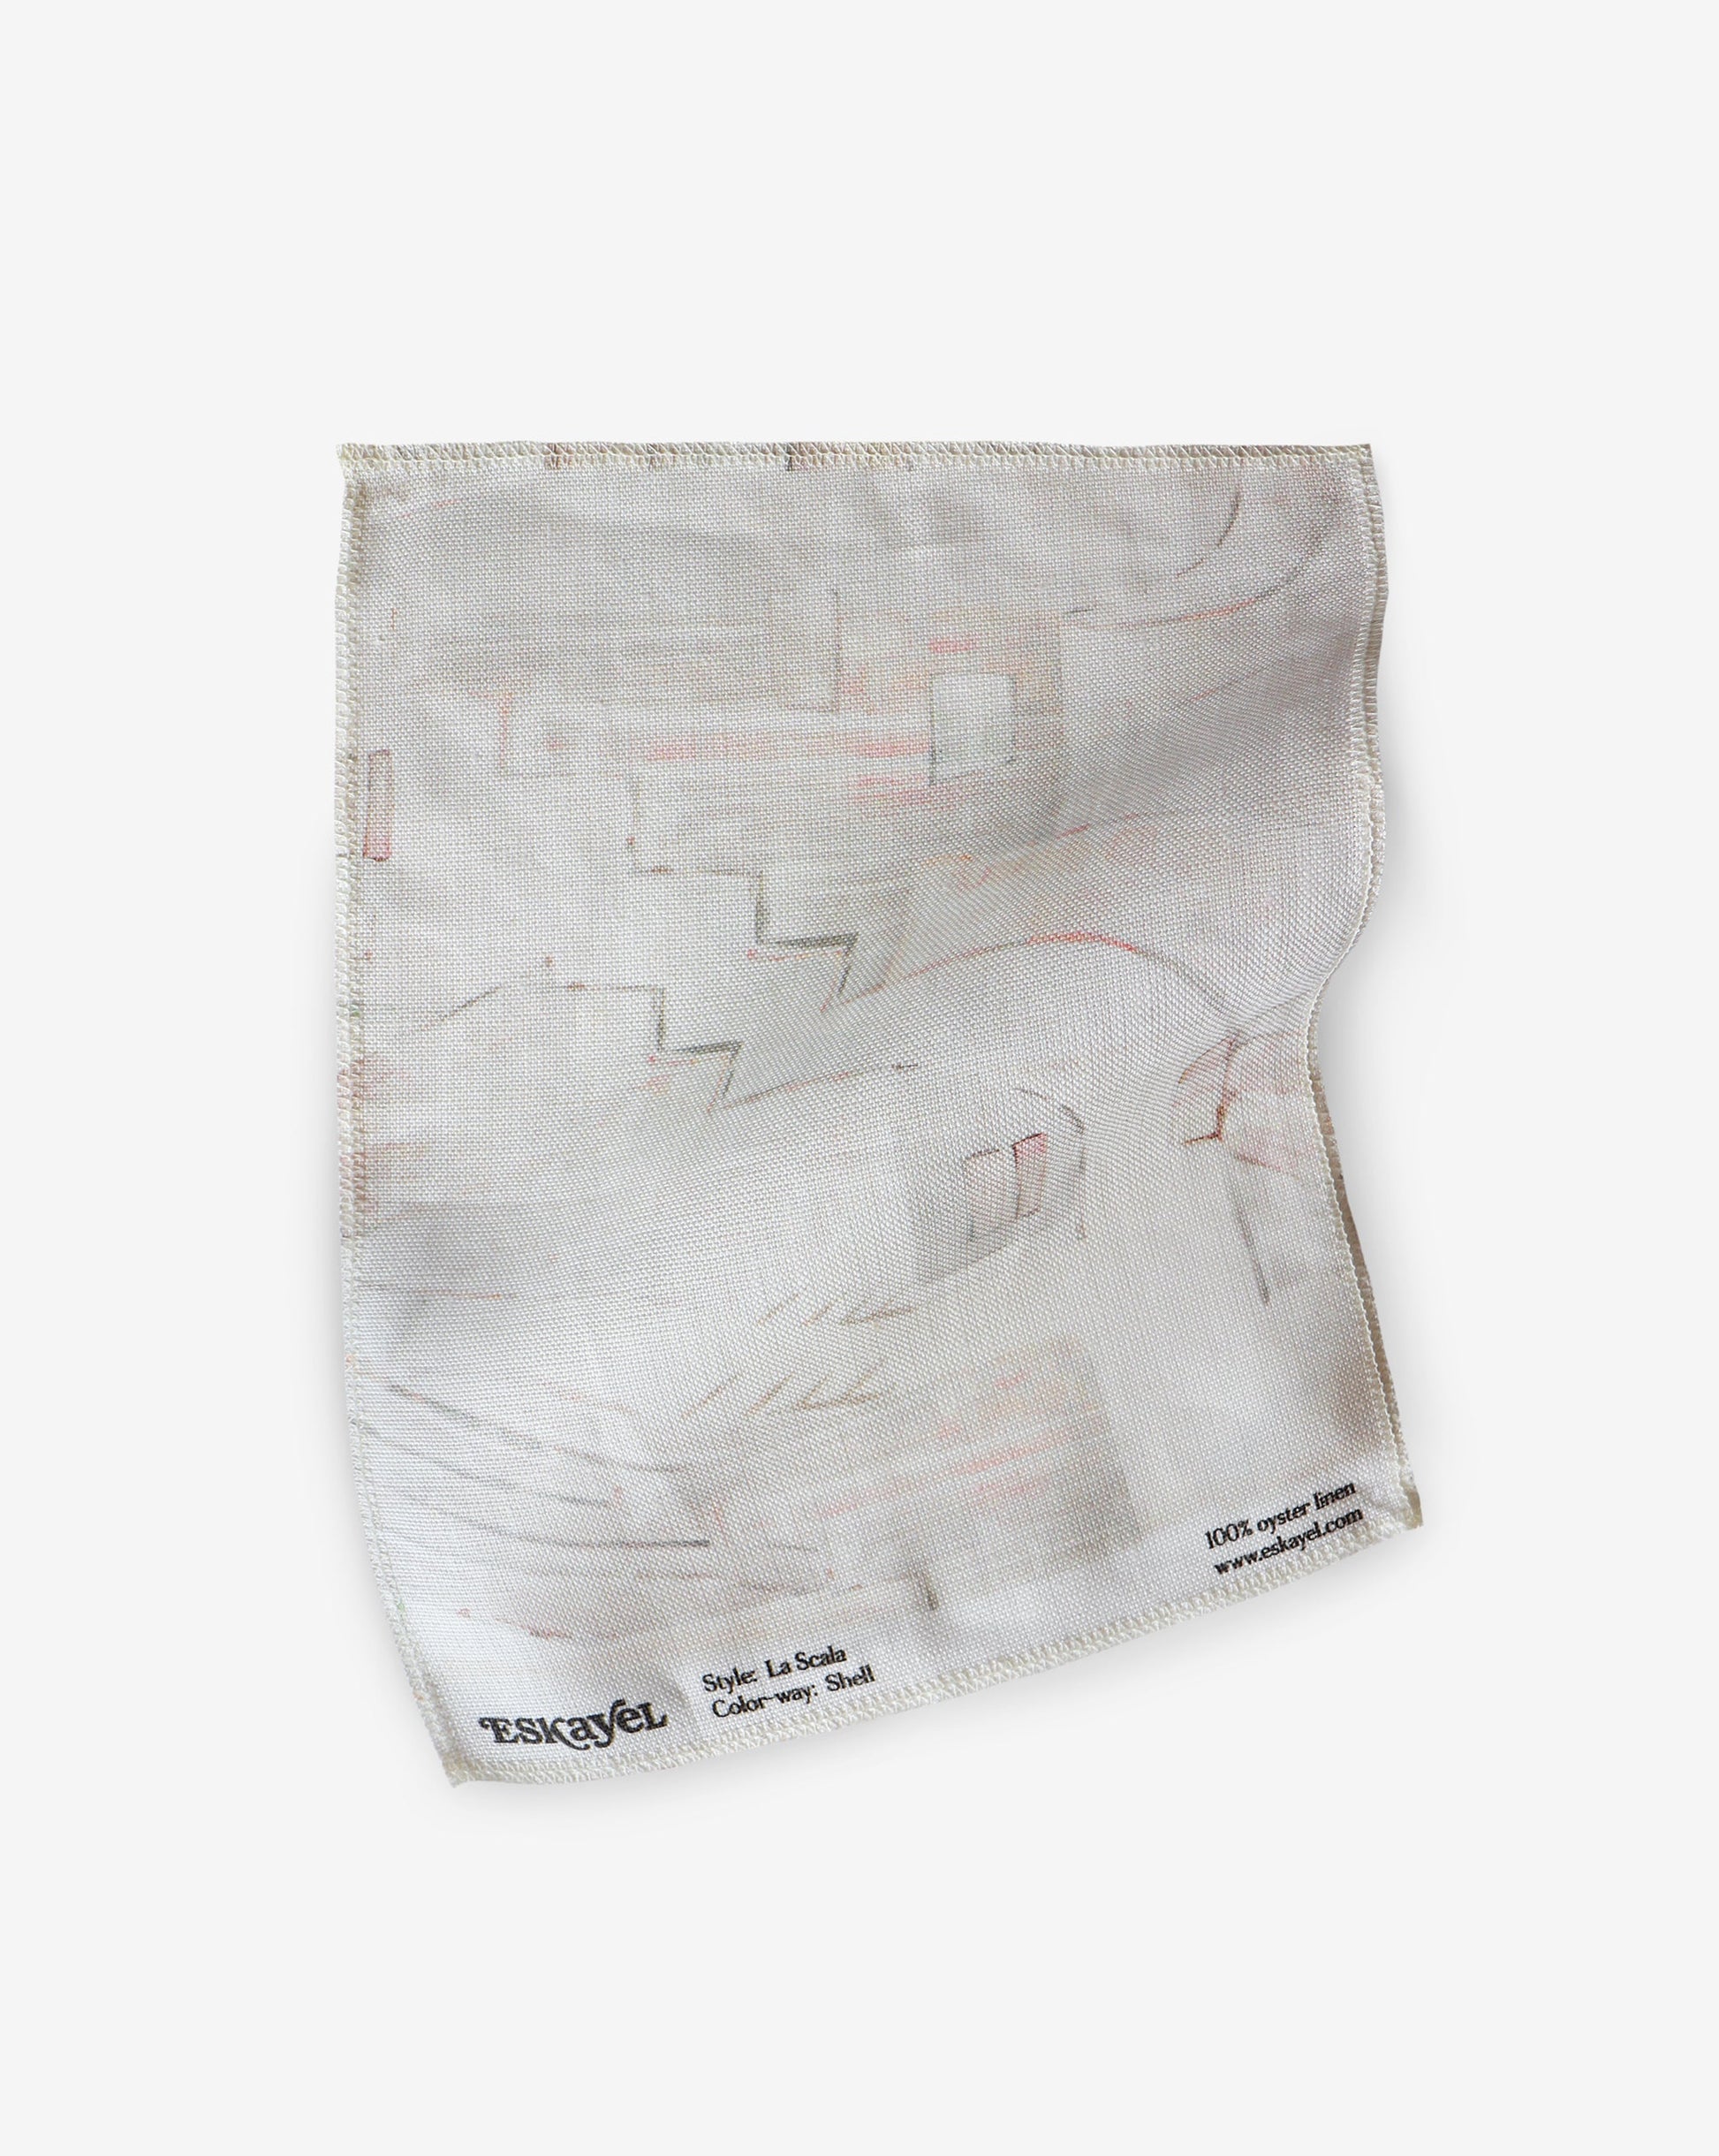 A white La Scala Fabric fabric with a map on it